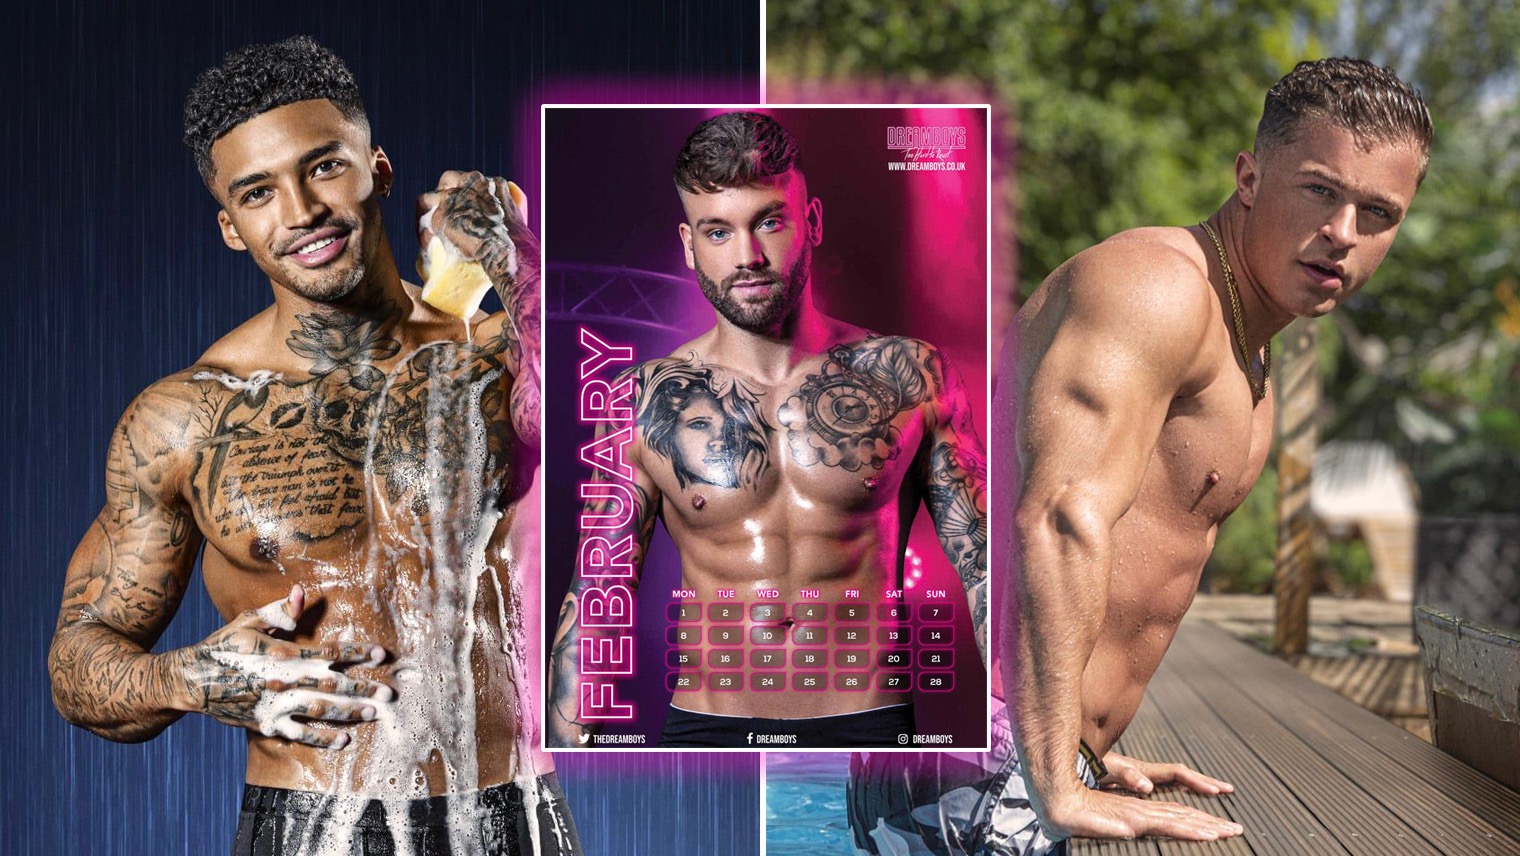  male strip show blog | Dreamboys 2021 calendars: The perfect gift to give this Christmas